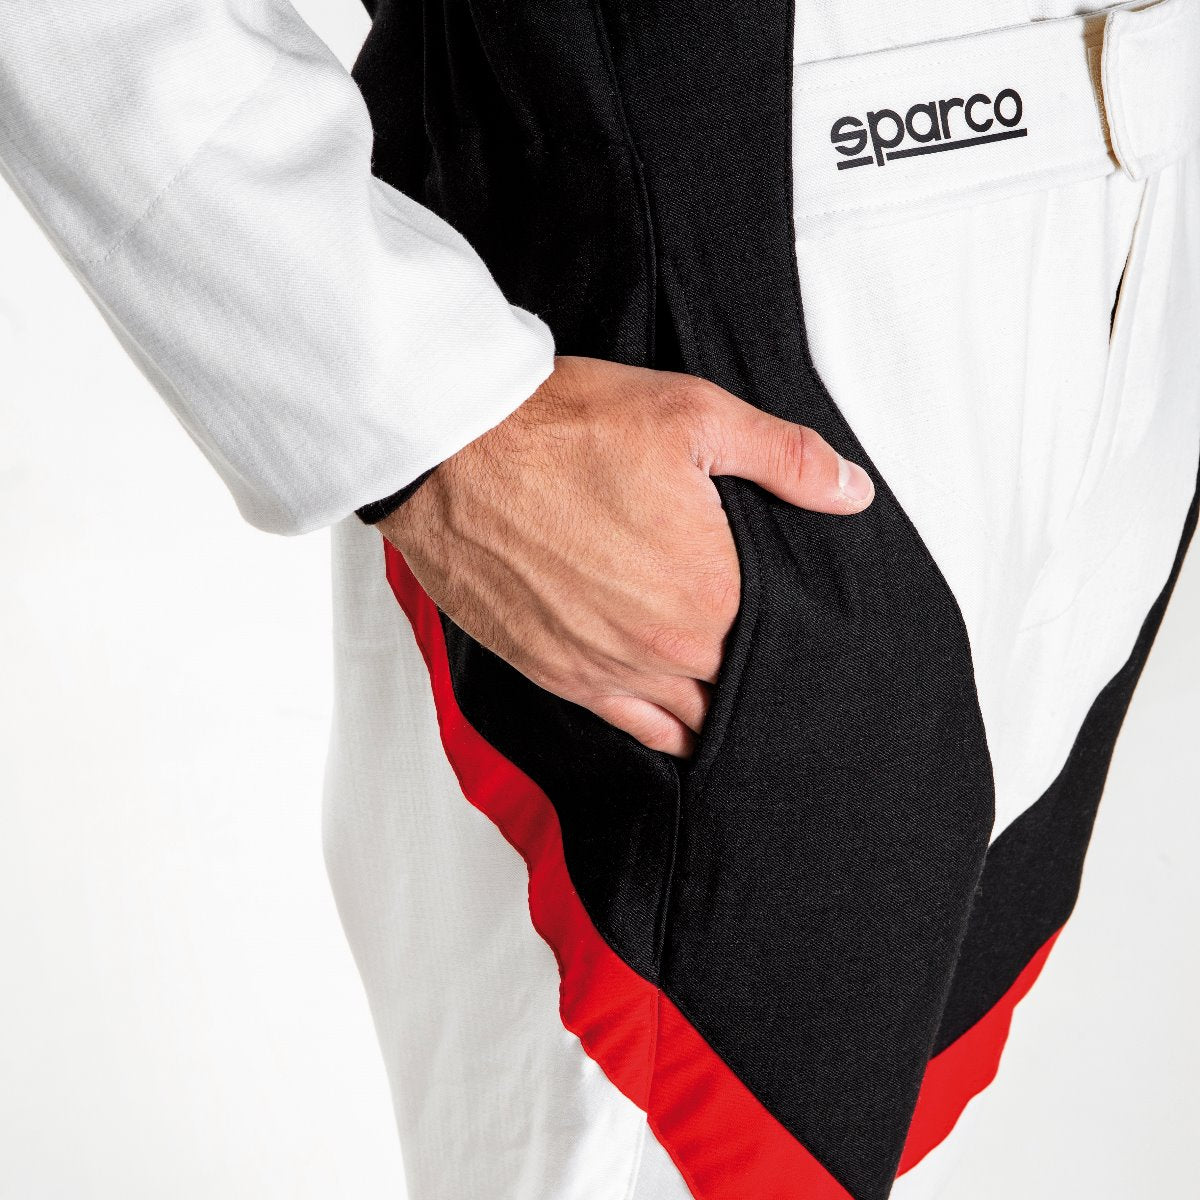 Sparco Victory Fire Suit 8856-2000 Pocket Image